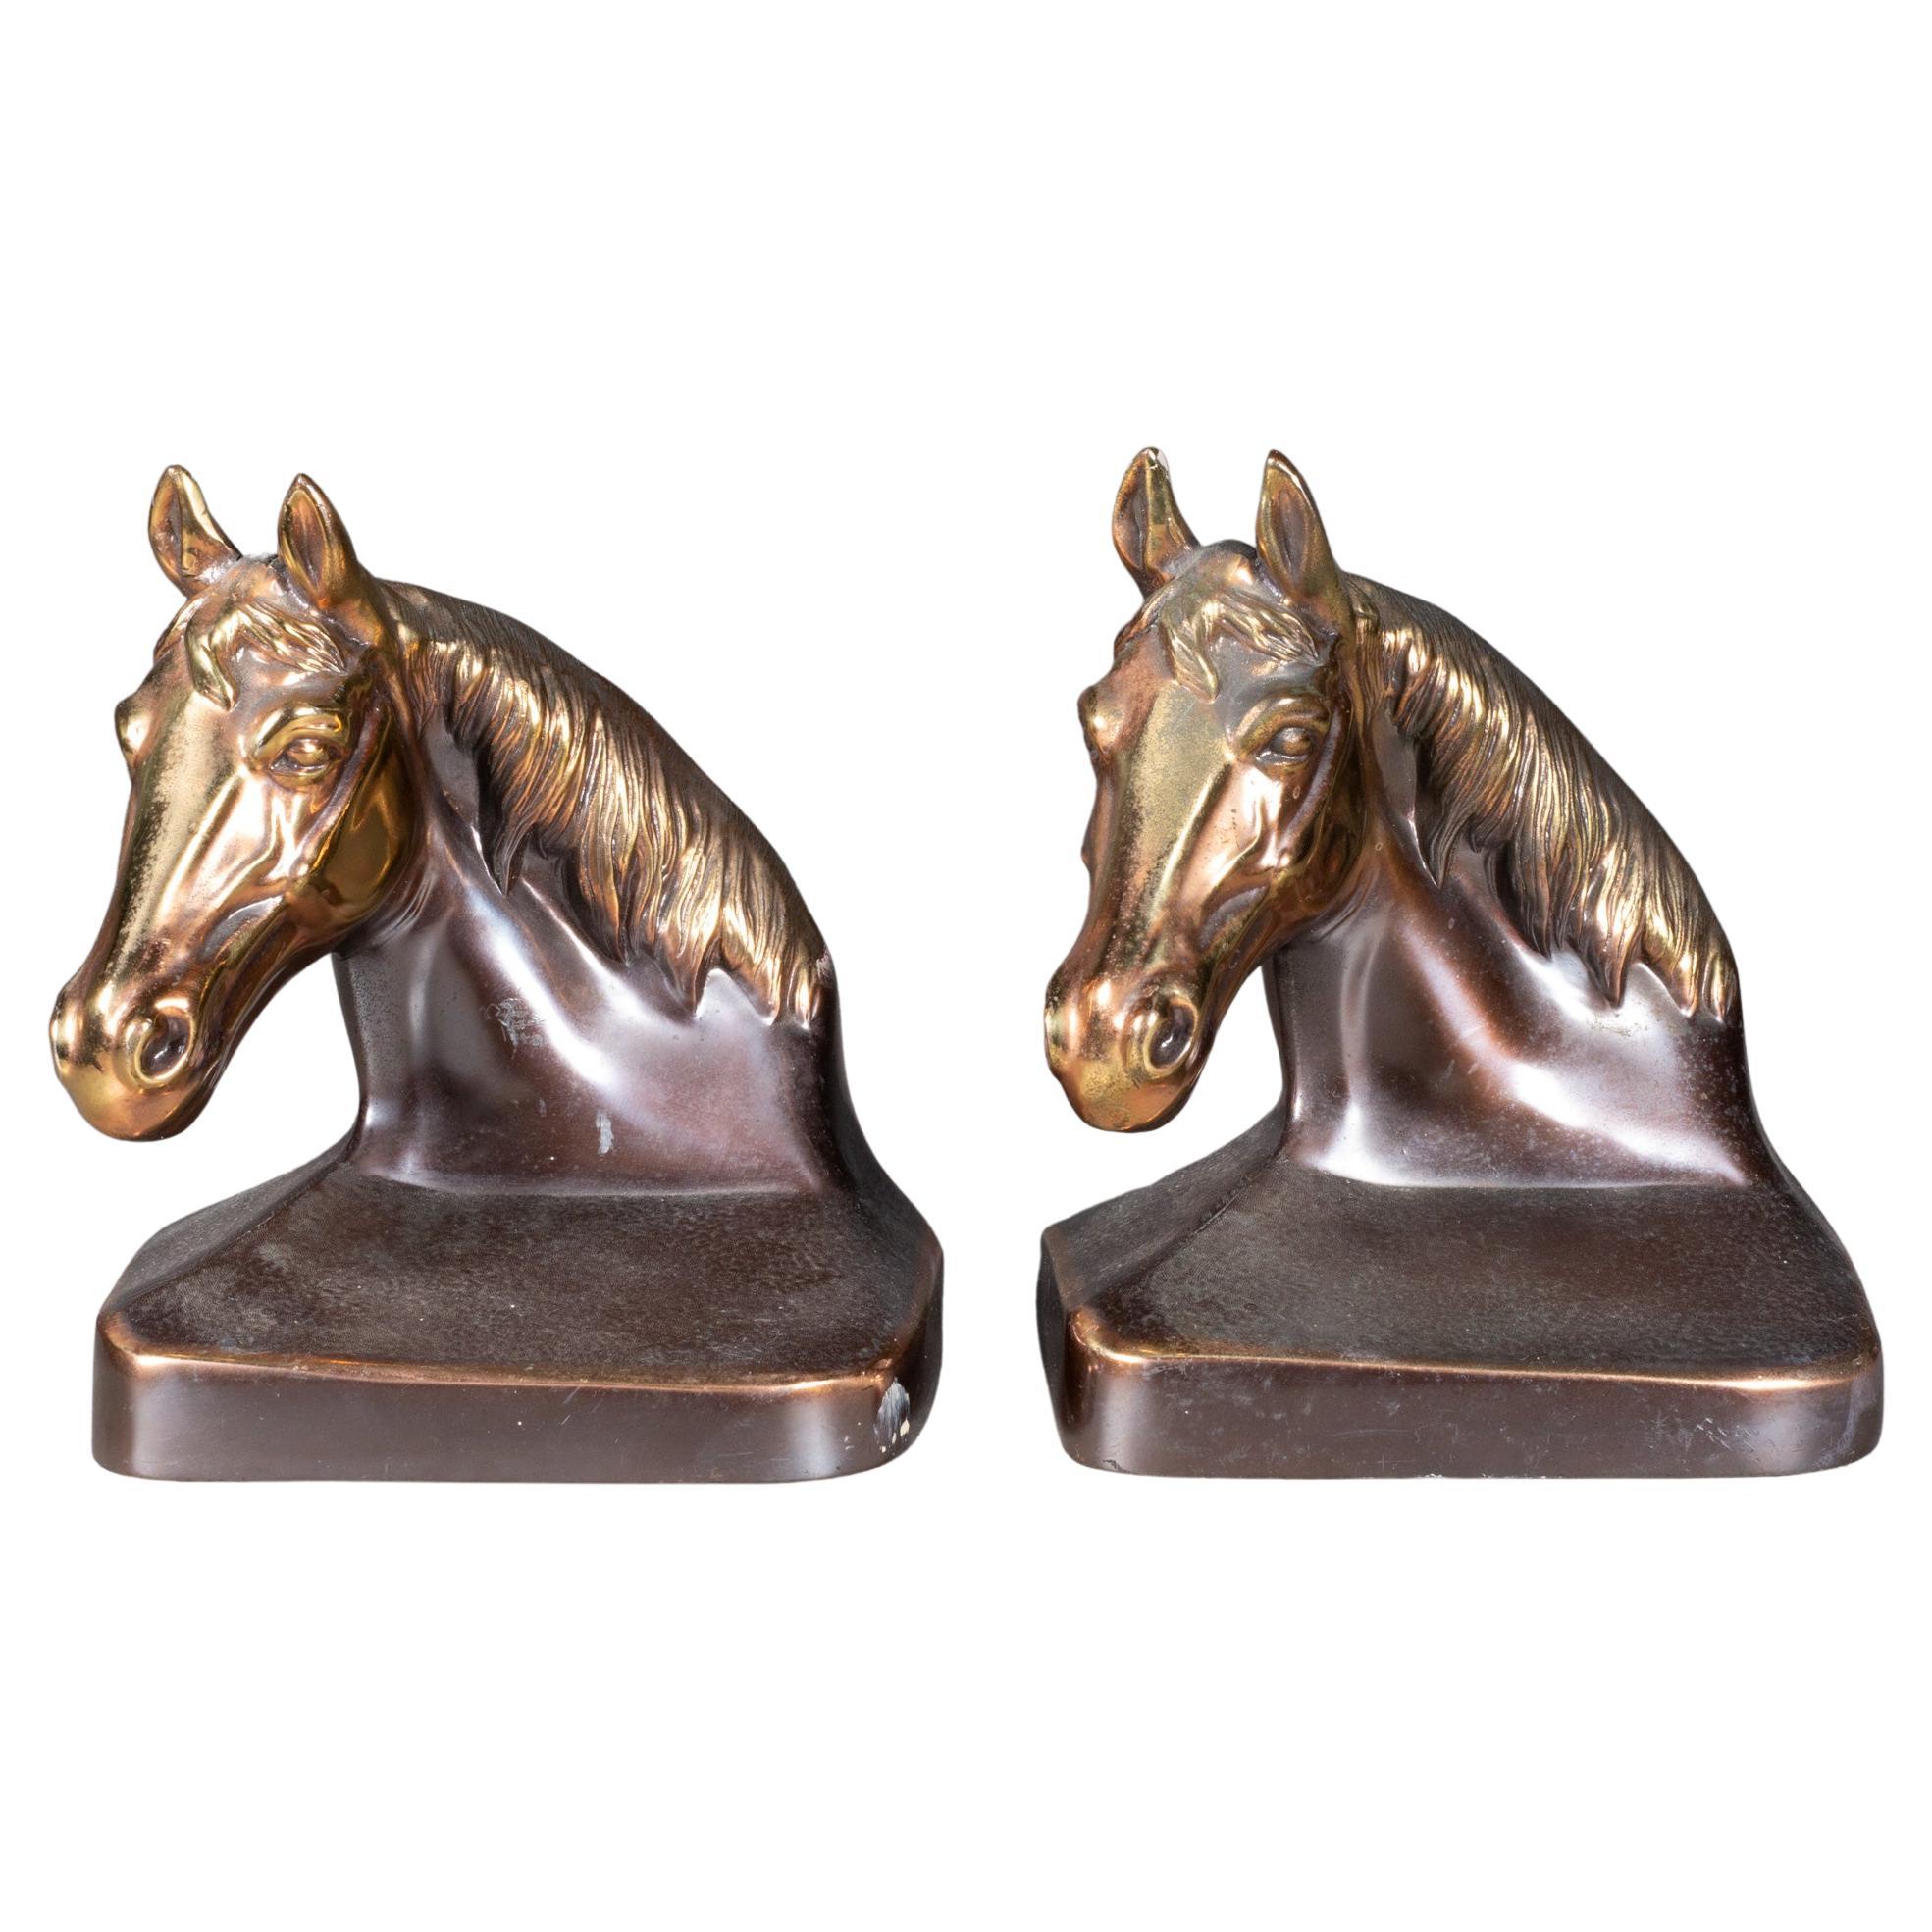 Bronze Plated Horse Head Bookends c.1940 (FREE SHIPPING)